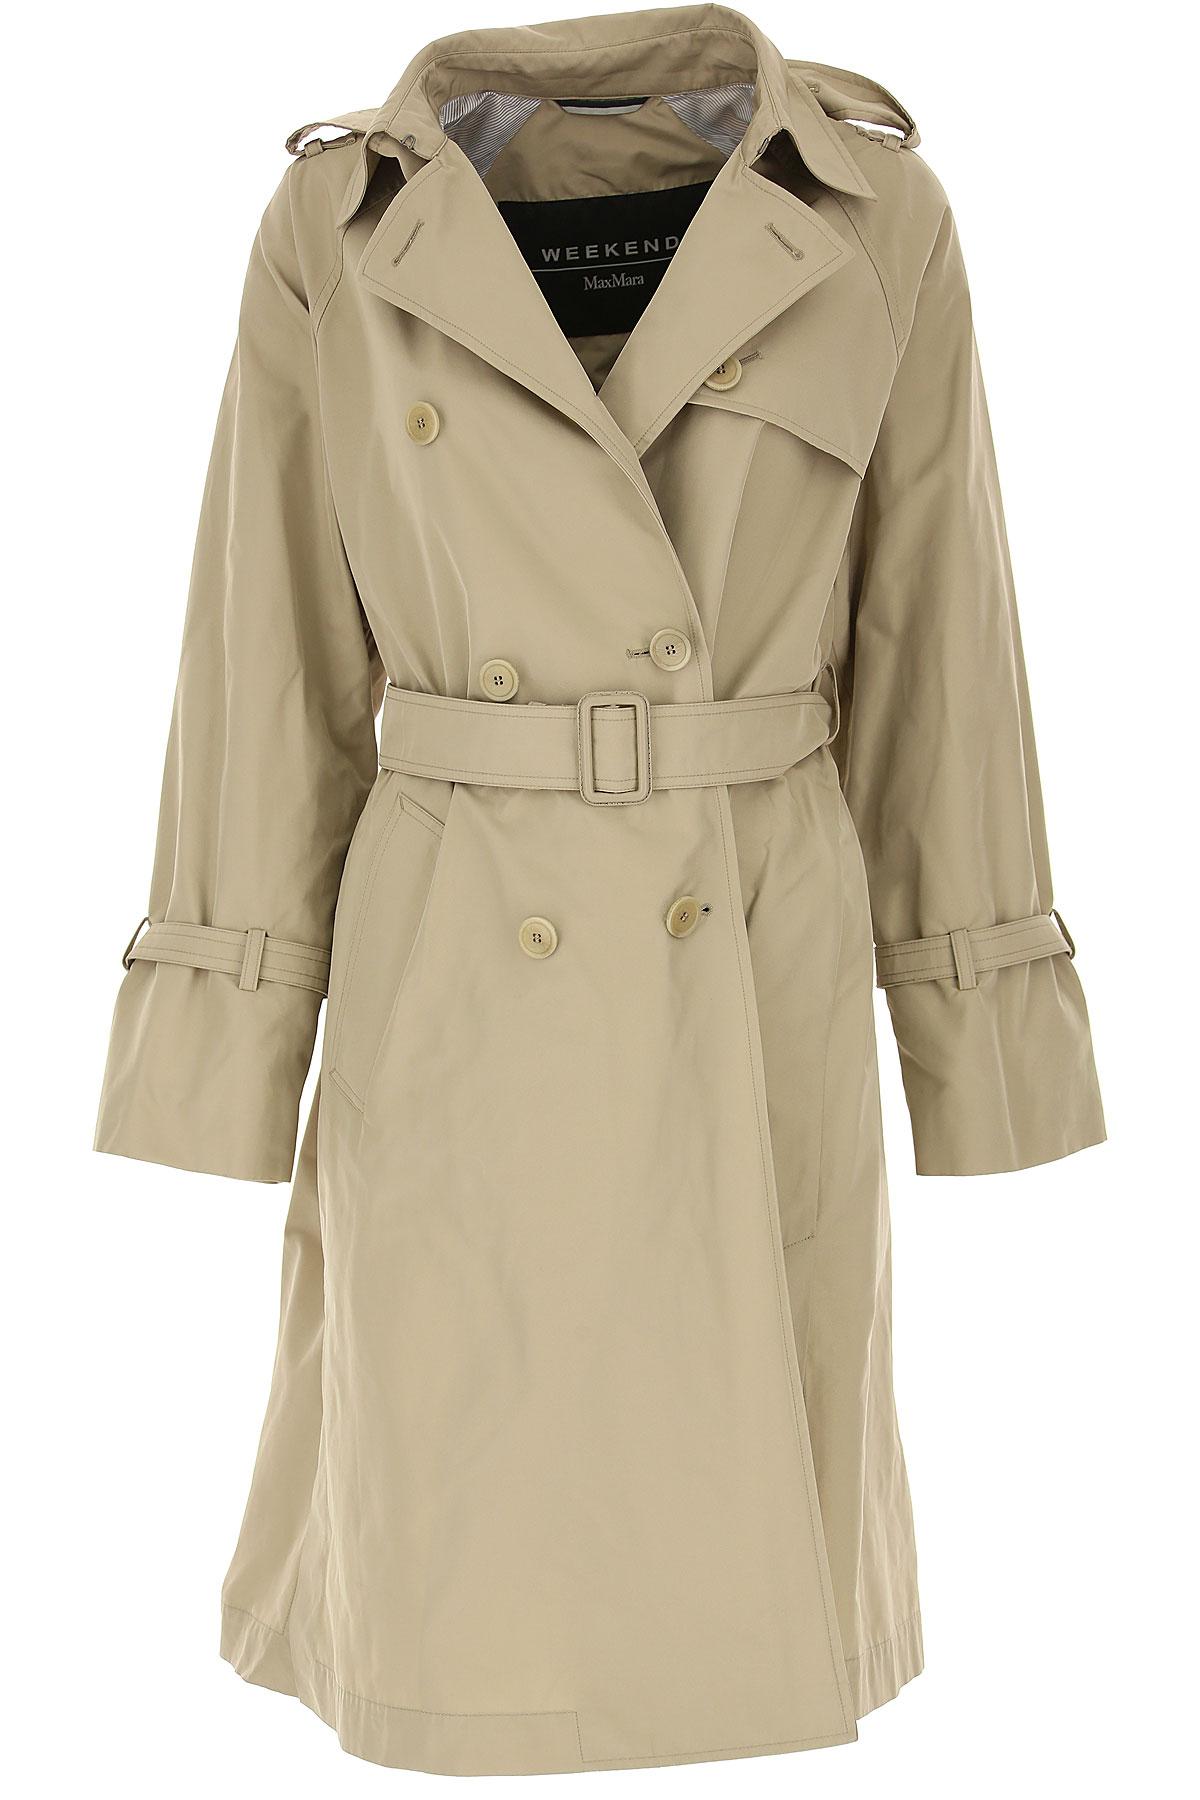 Max Mara Synthetic Women's Coat On Sale in Beige (Natural) - Lyst